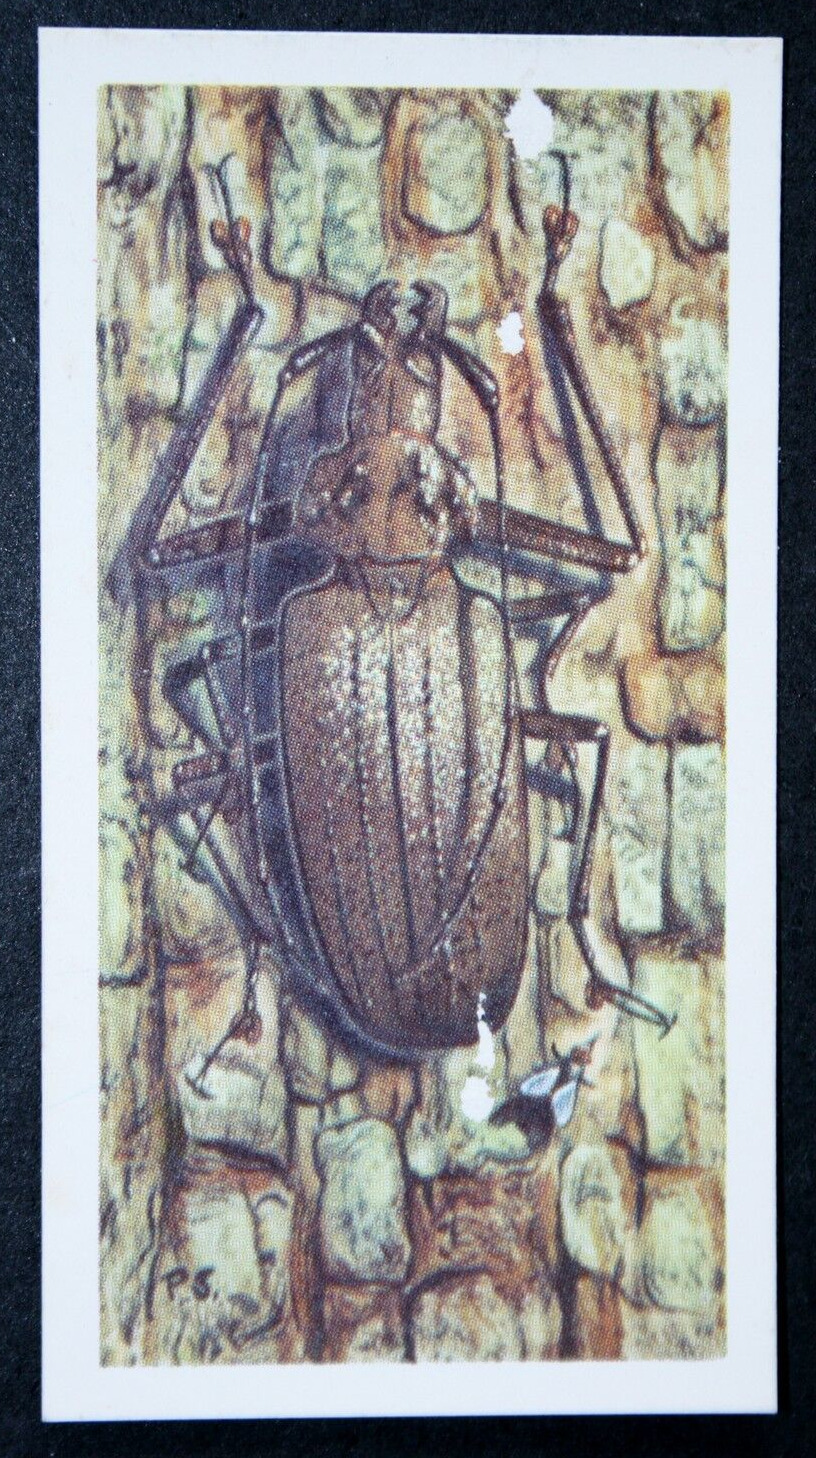 GIANT FIJIAN LONG-HORNED BEETLE  Vintage  1963 Illustrated Insect Card   FD06MS